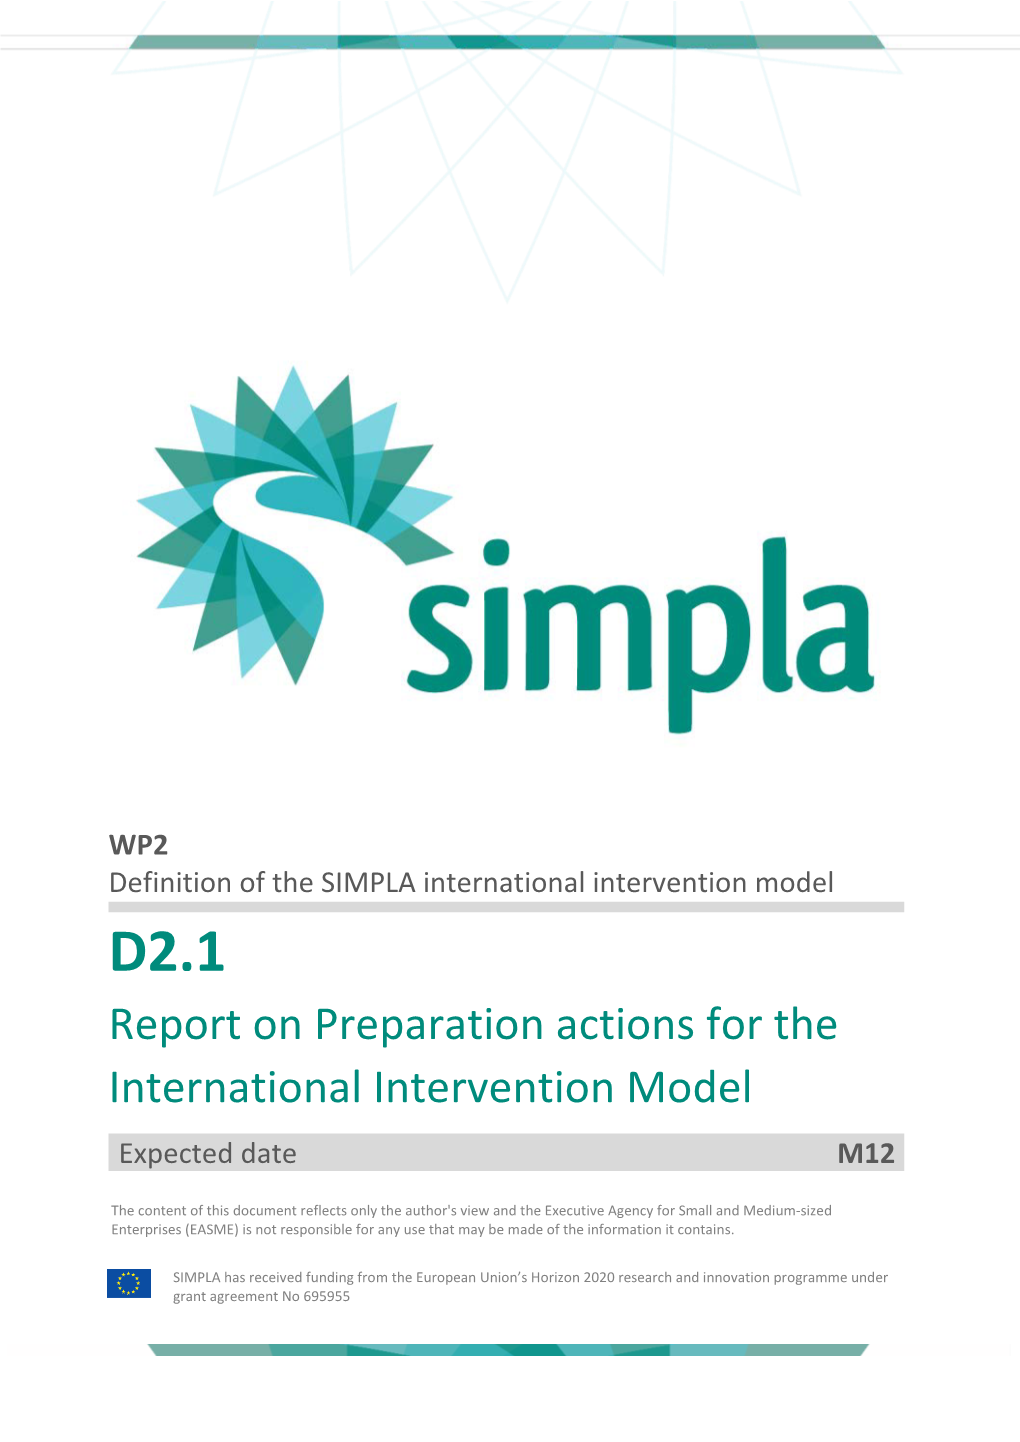 Report on Preparation Actions for the International Intervention Model Expected Date M12